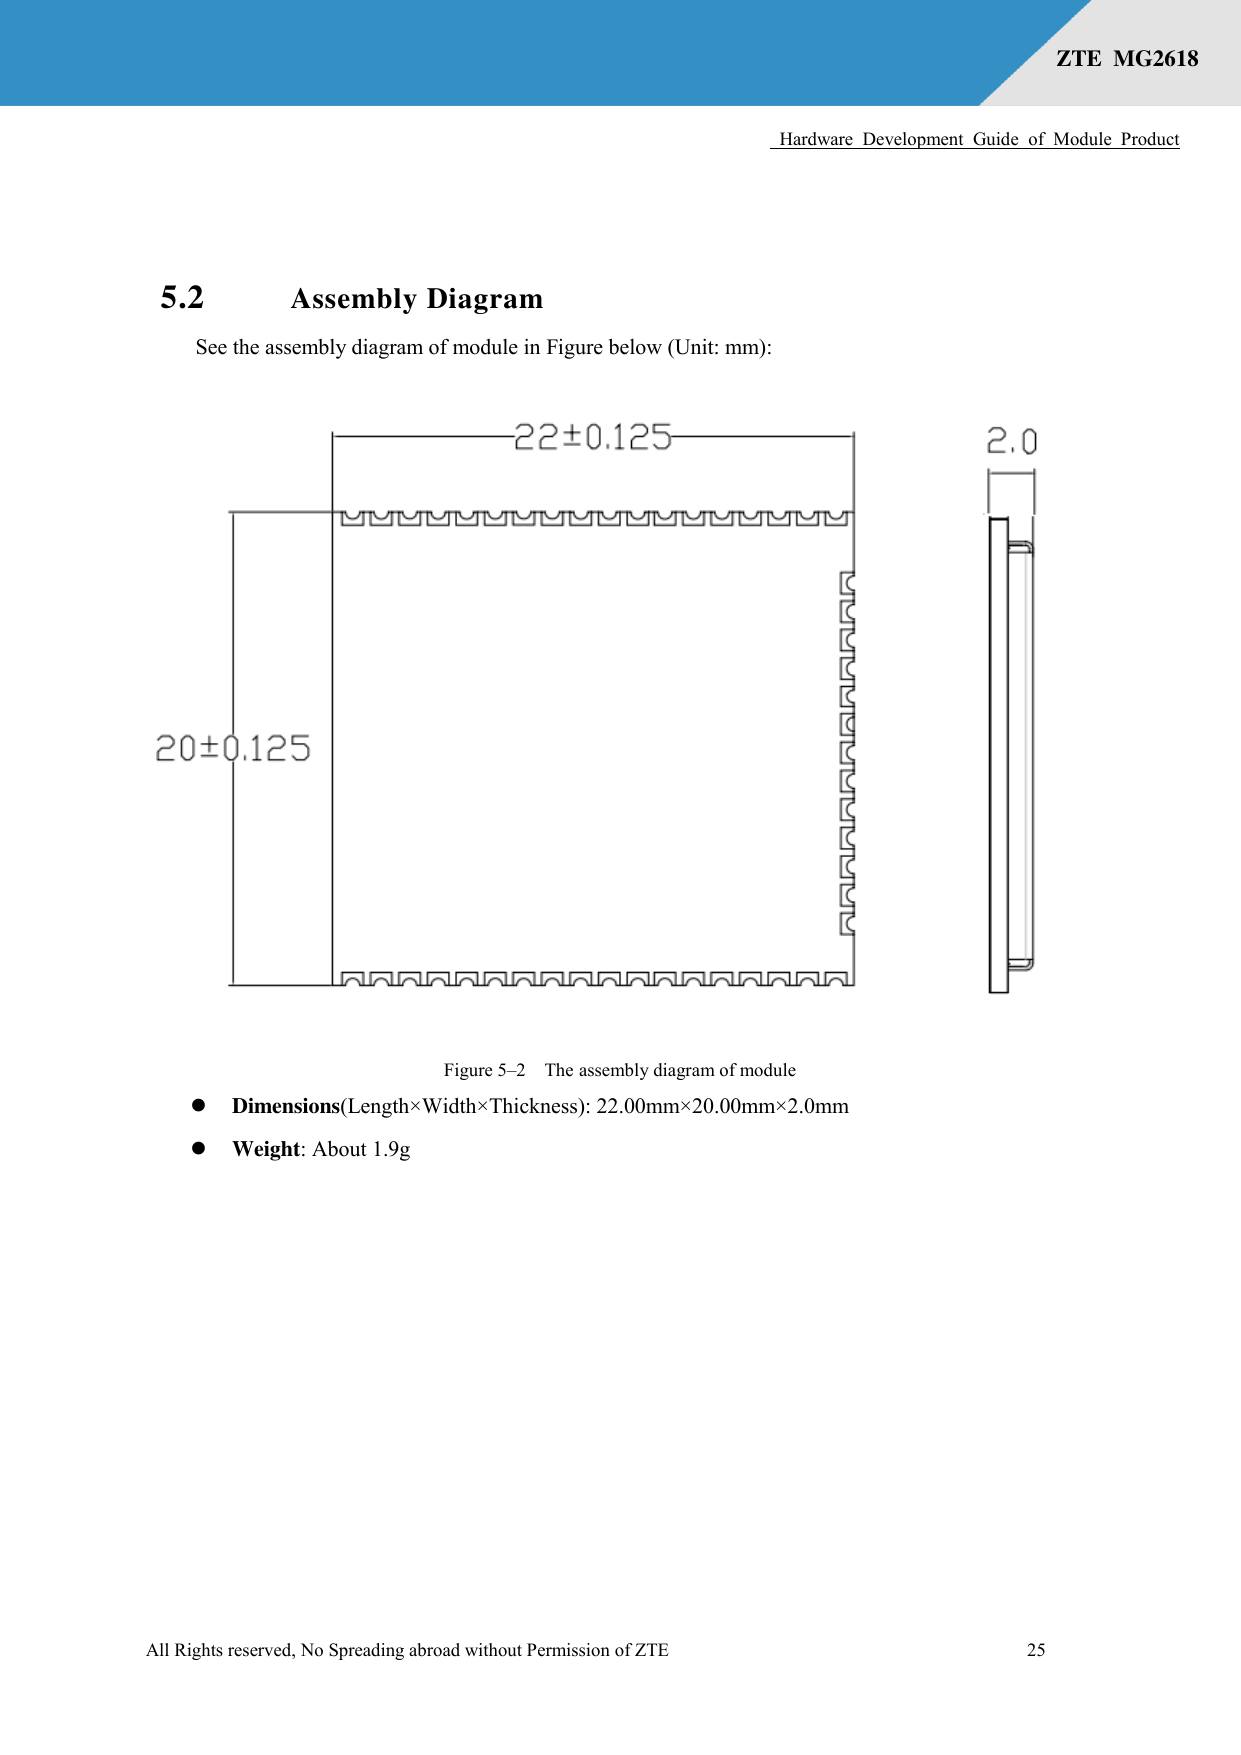      Hardware  Development  Guide  of  Module  Product  All Rights reserved, No Spreading abroad without Permission of ZTE              25 ZTE  MG2618    5.2 Assembly Diagram See the assembly diagram of module in Figure below (Unit: mm):  Figure 5–2  The assembly diagram of module  Dimensions(Length×Width×Thickness): 22.00mm×20.00mm×2.0mm  Weight: About 1.9g 